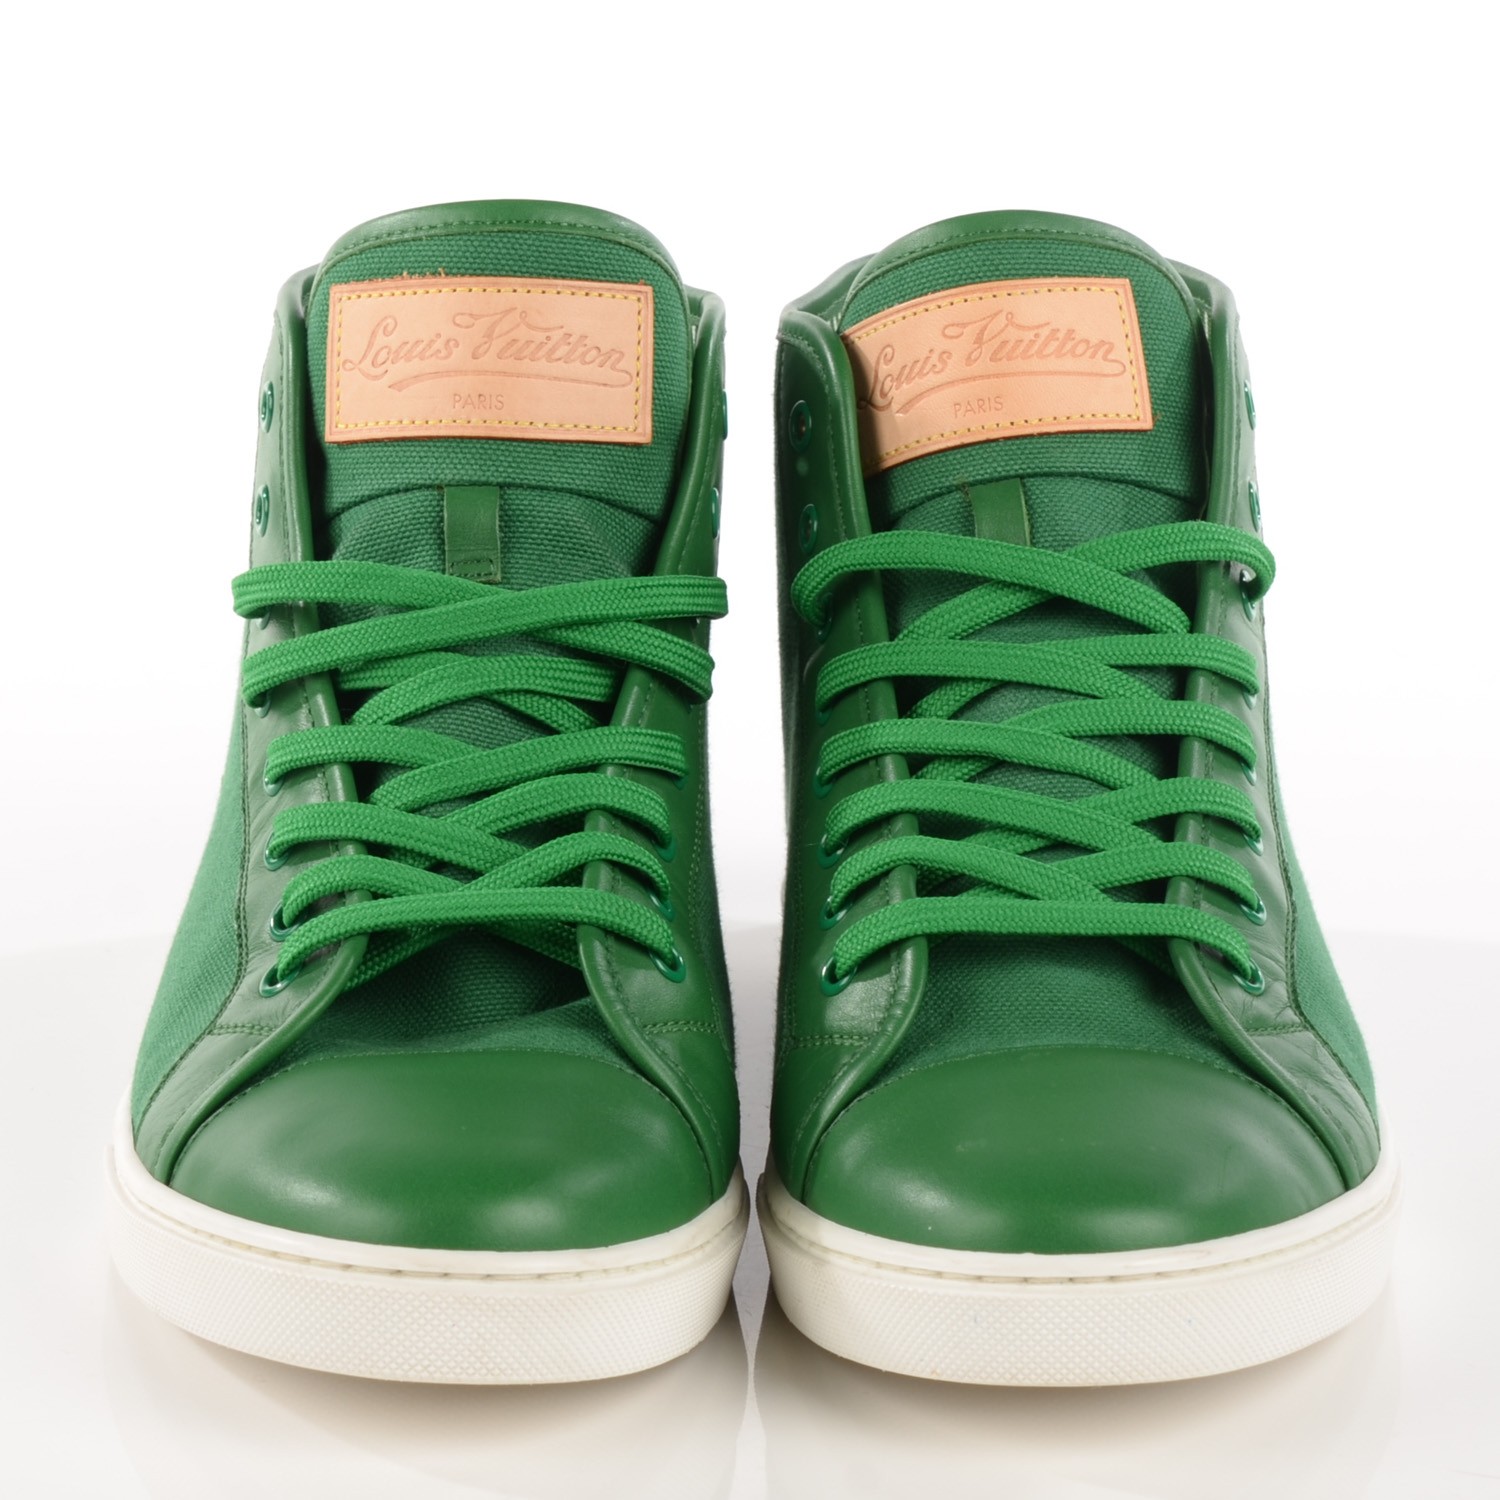 LOUIS VUITTON Mens Leather Canvas High Top Sneakers 8 Green 117302